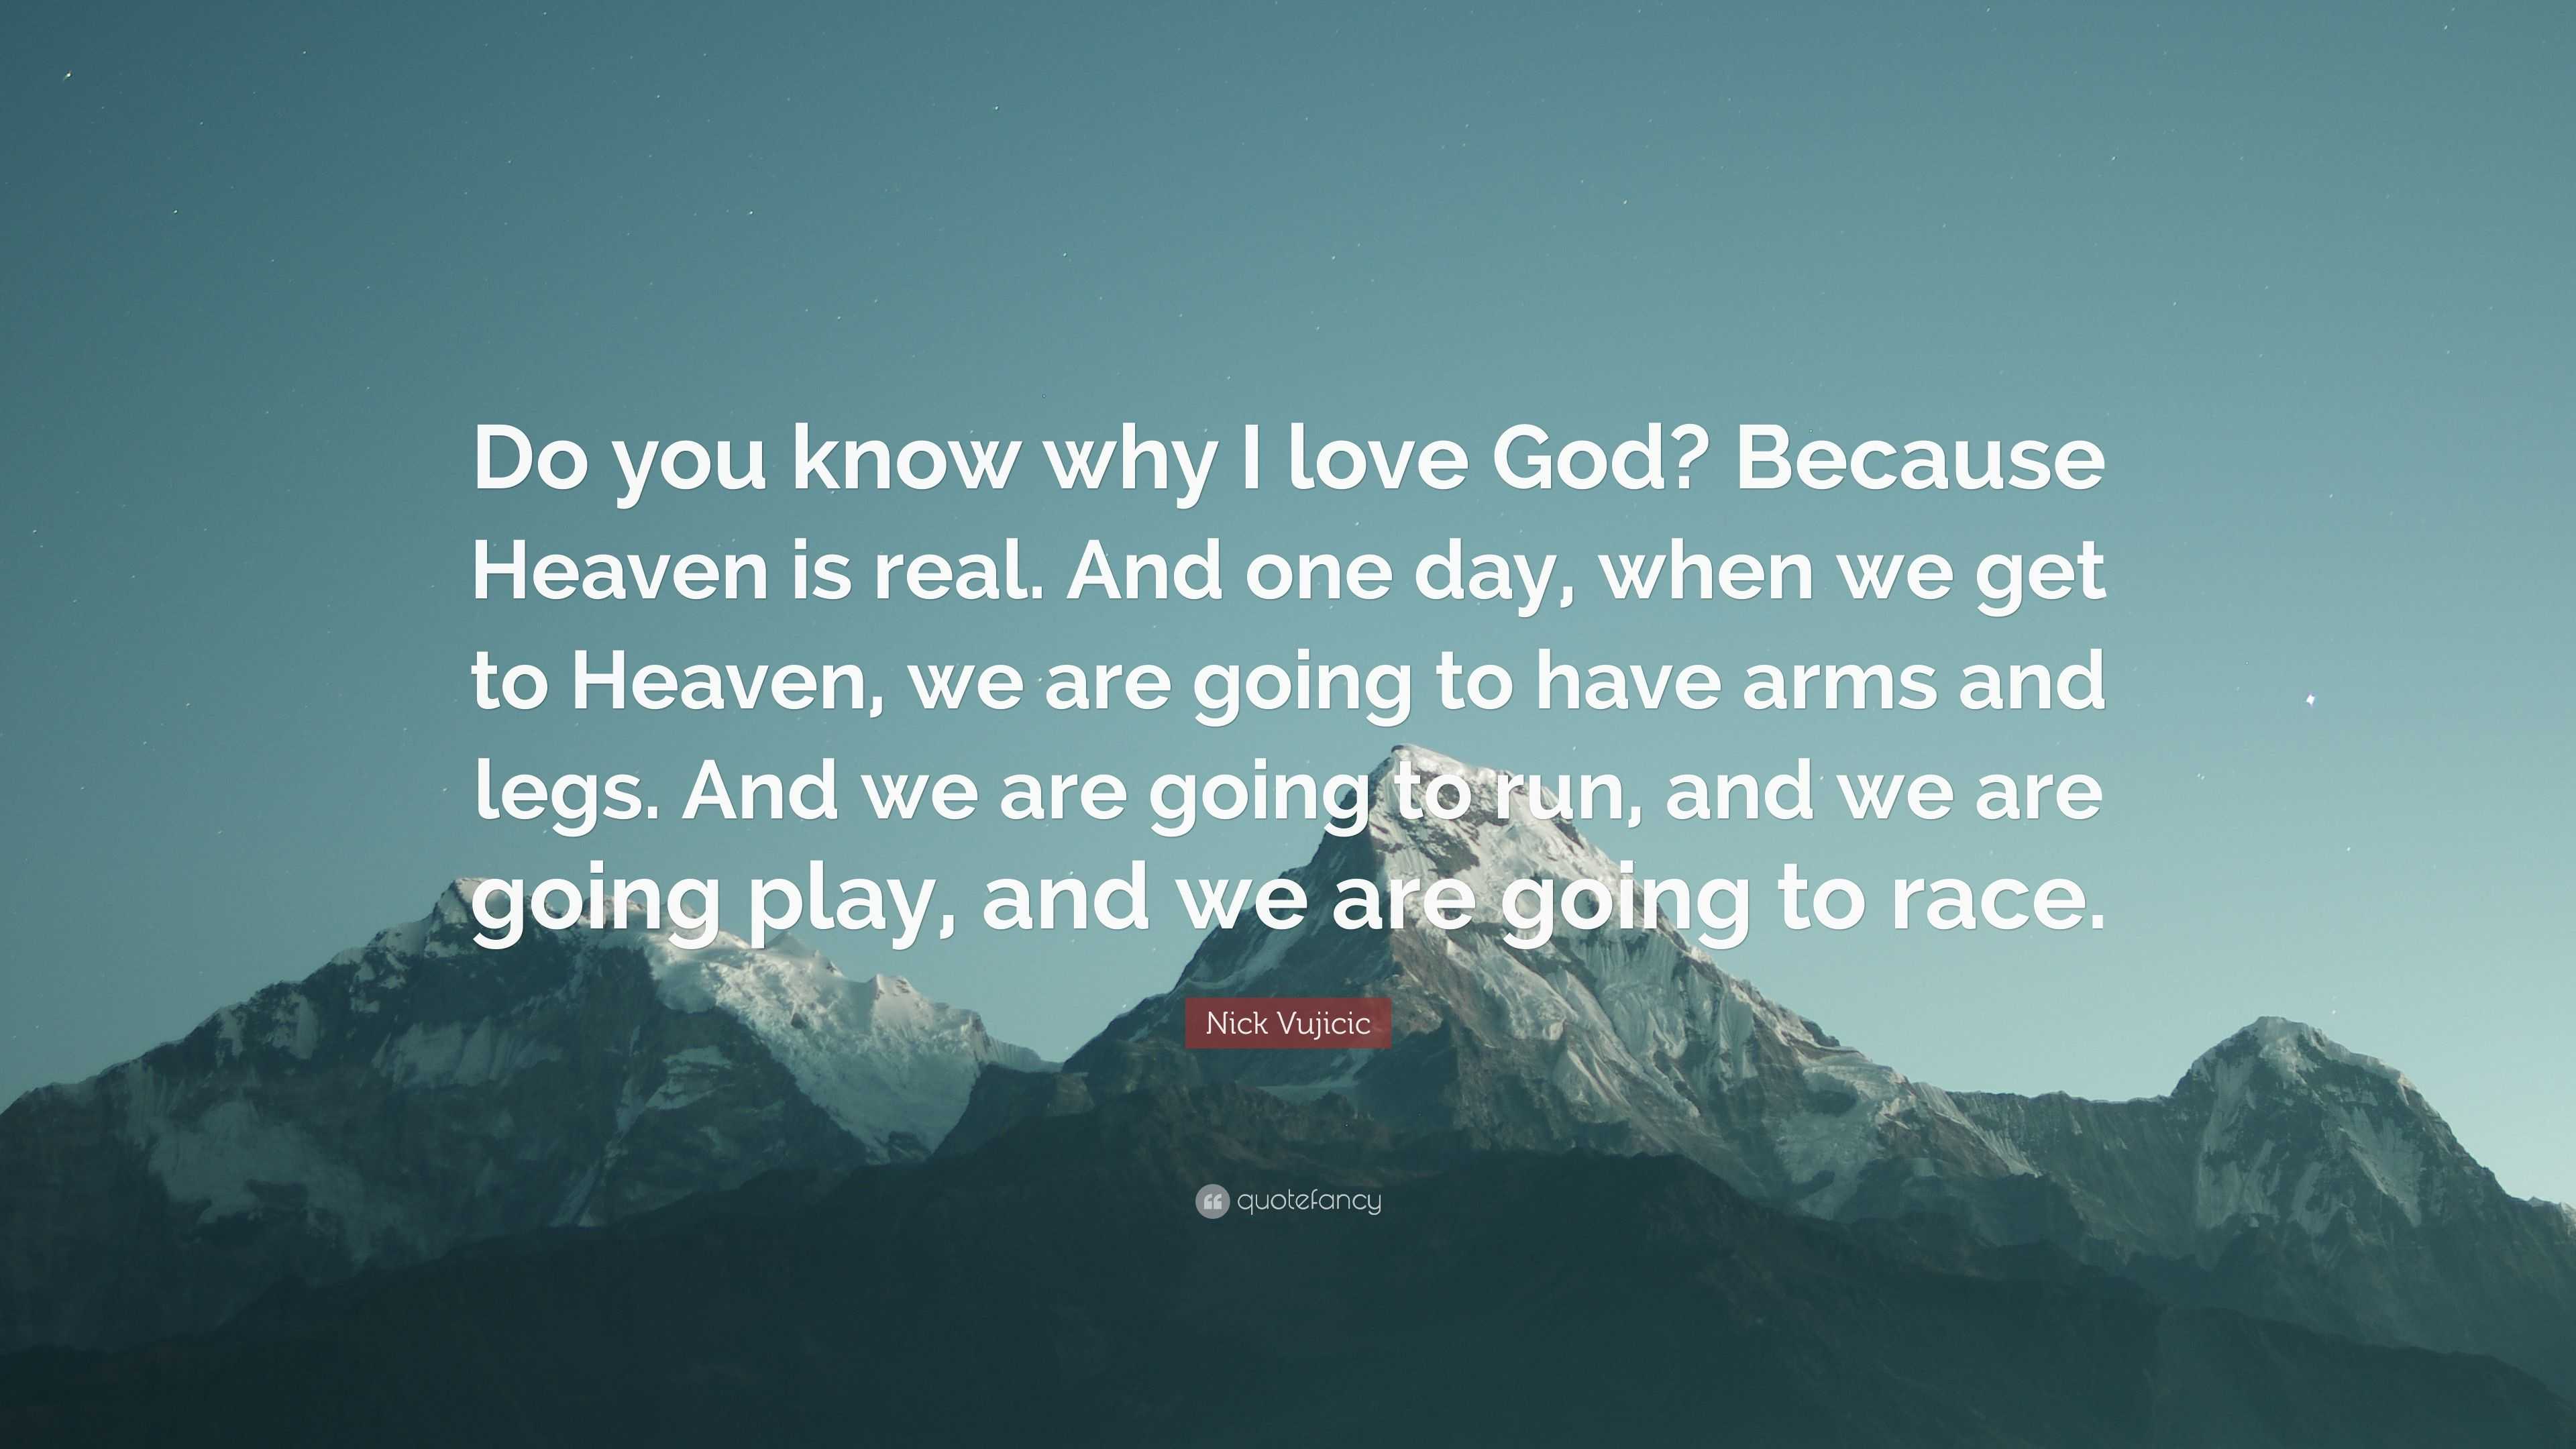 Nick Vujicic Quote “Do you know why I love God Because Heaven is